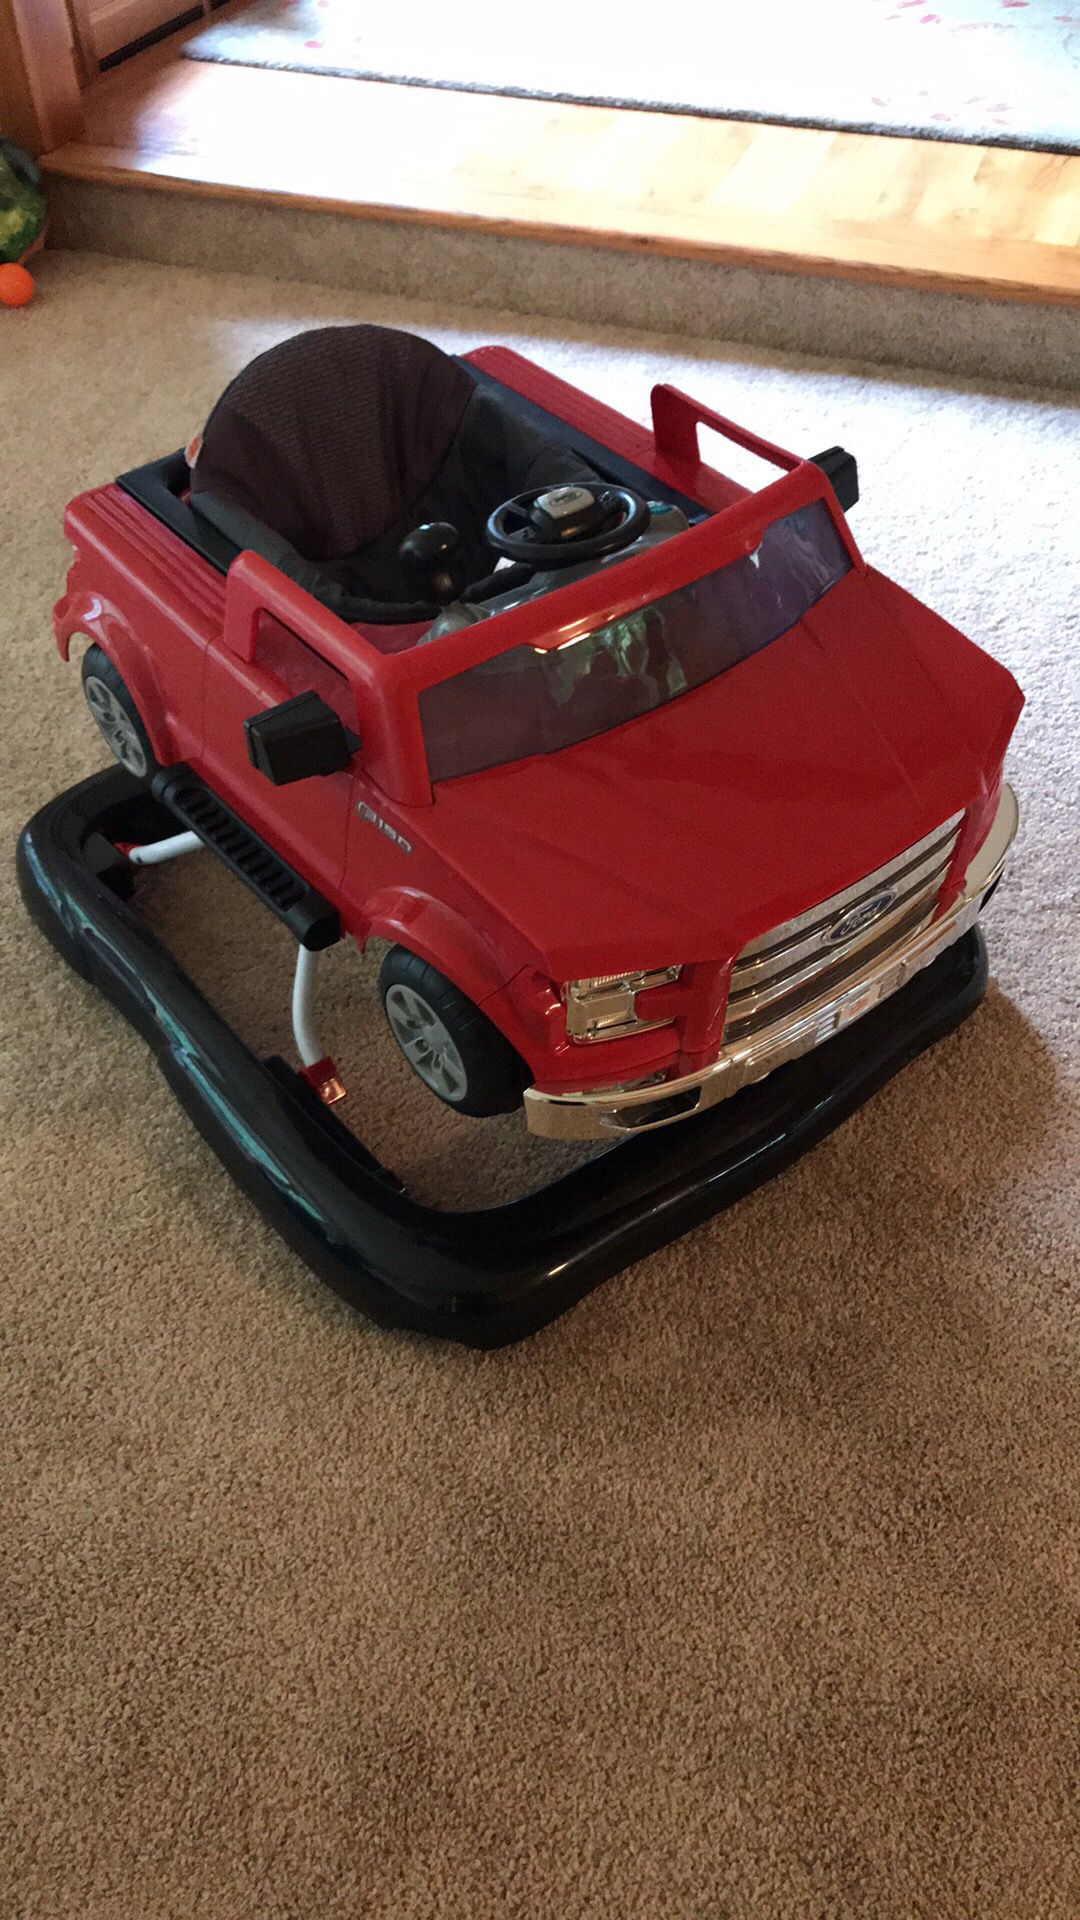 Red Ford Truck Baby walker/toy